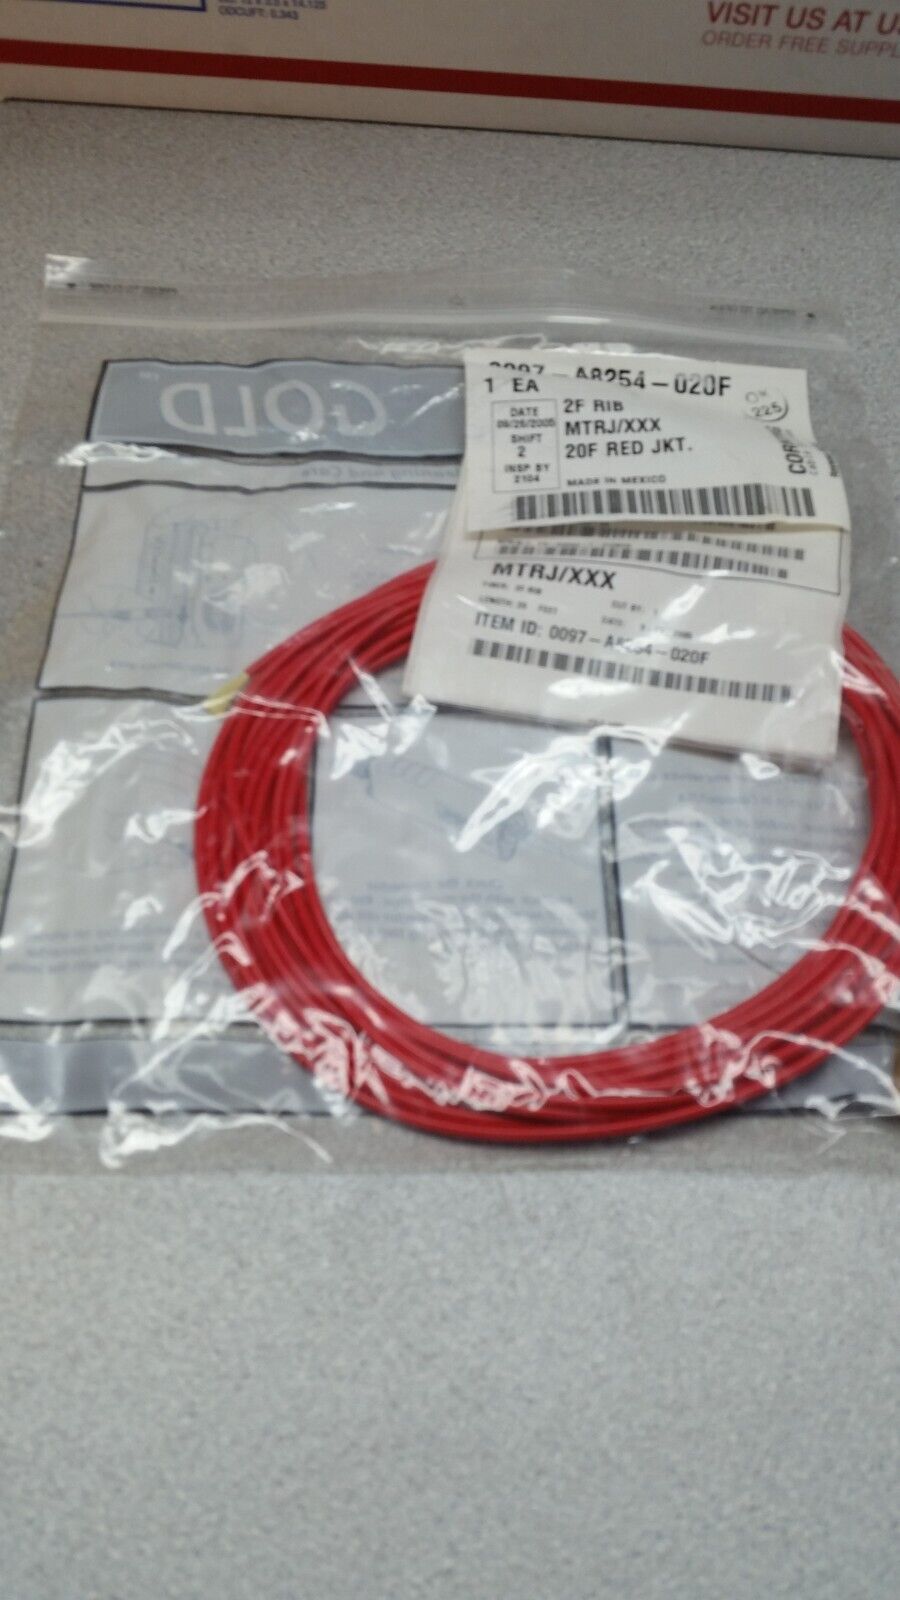 Corning Cable Systems MTRJ/XXX 20F REDJKT Fiber Optic Cable 0097-A8254-020F